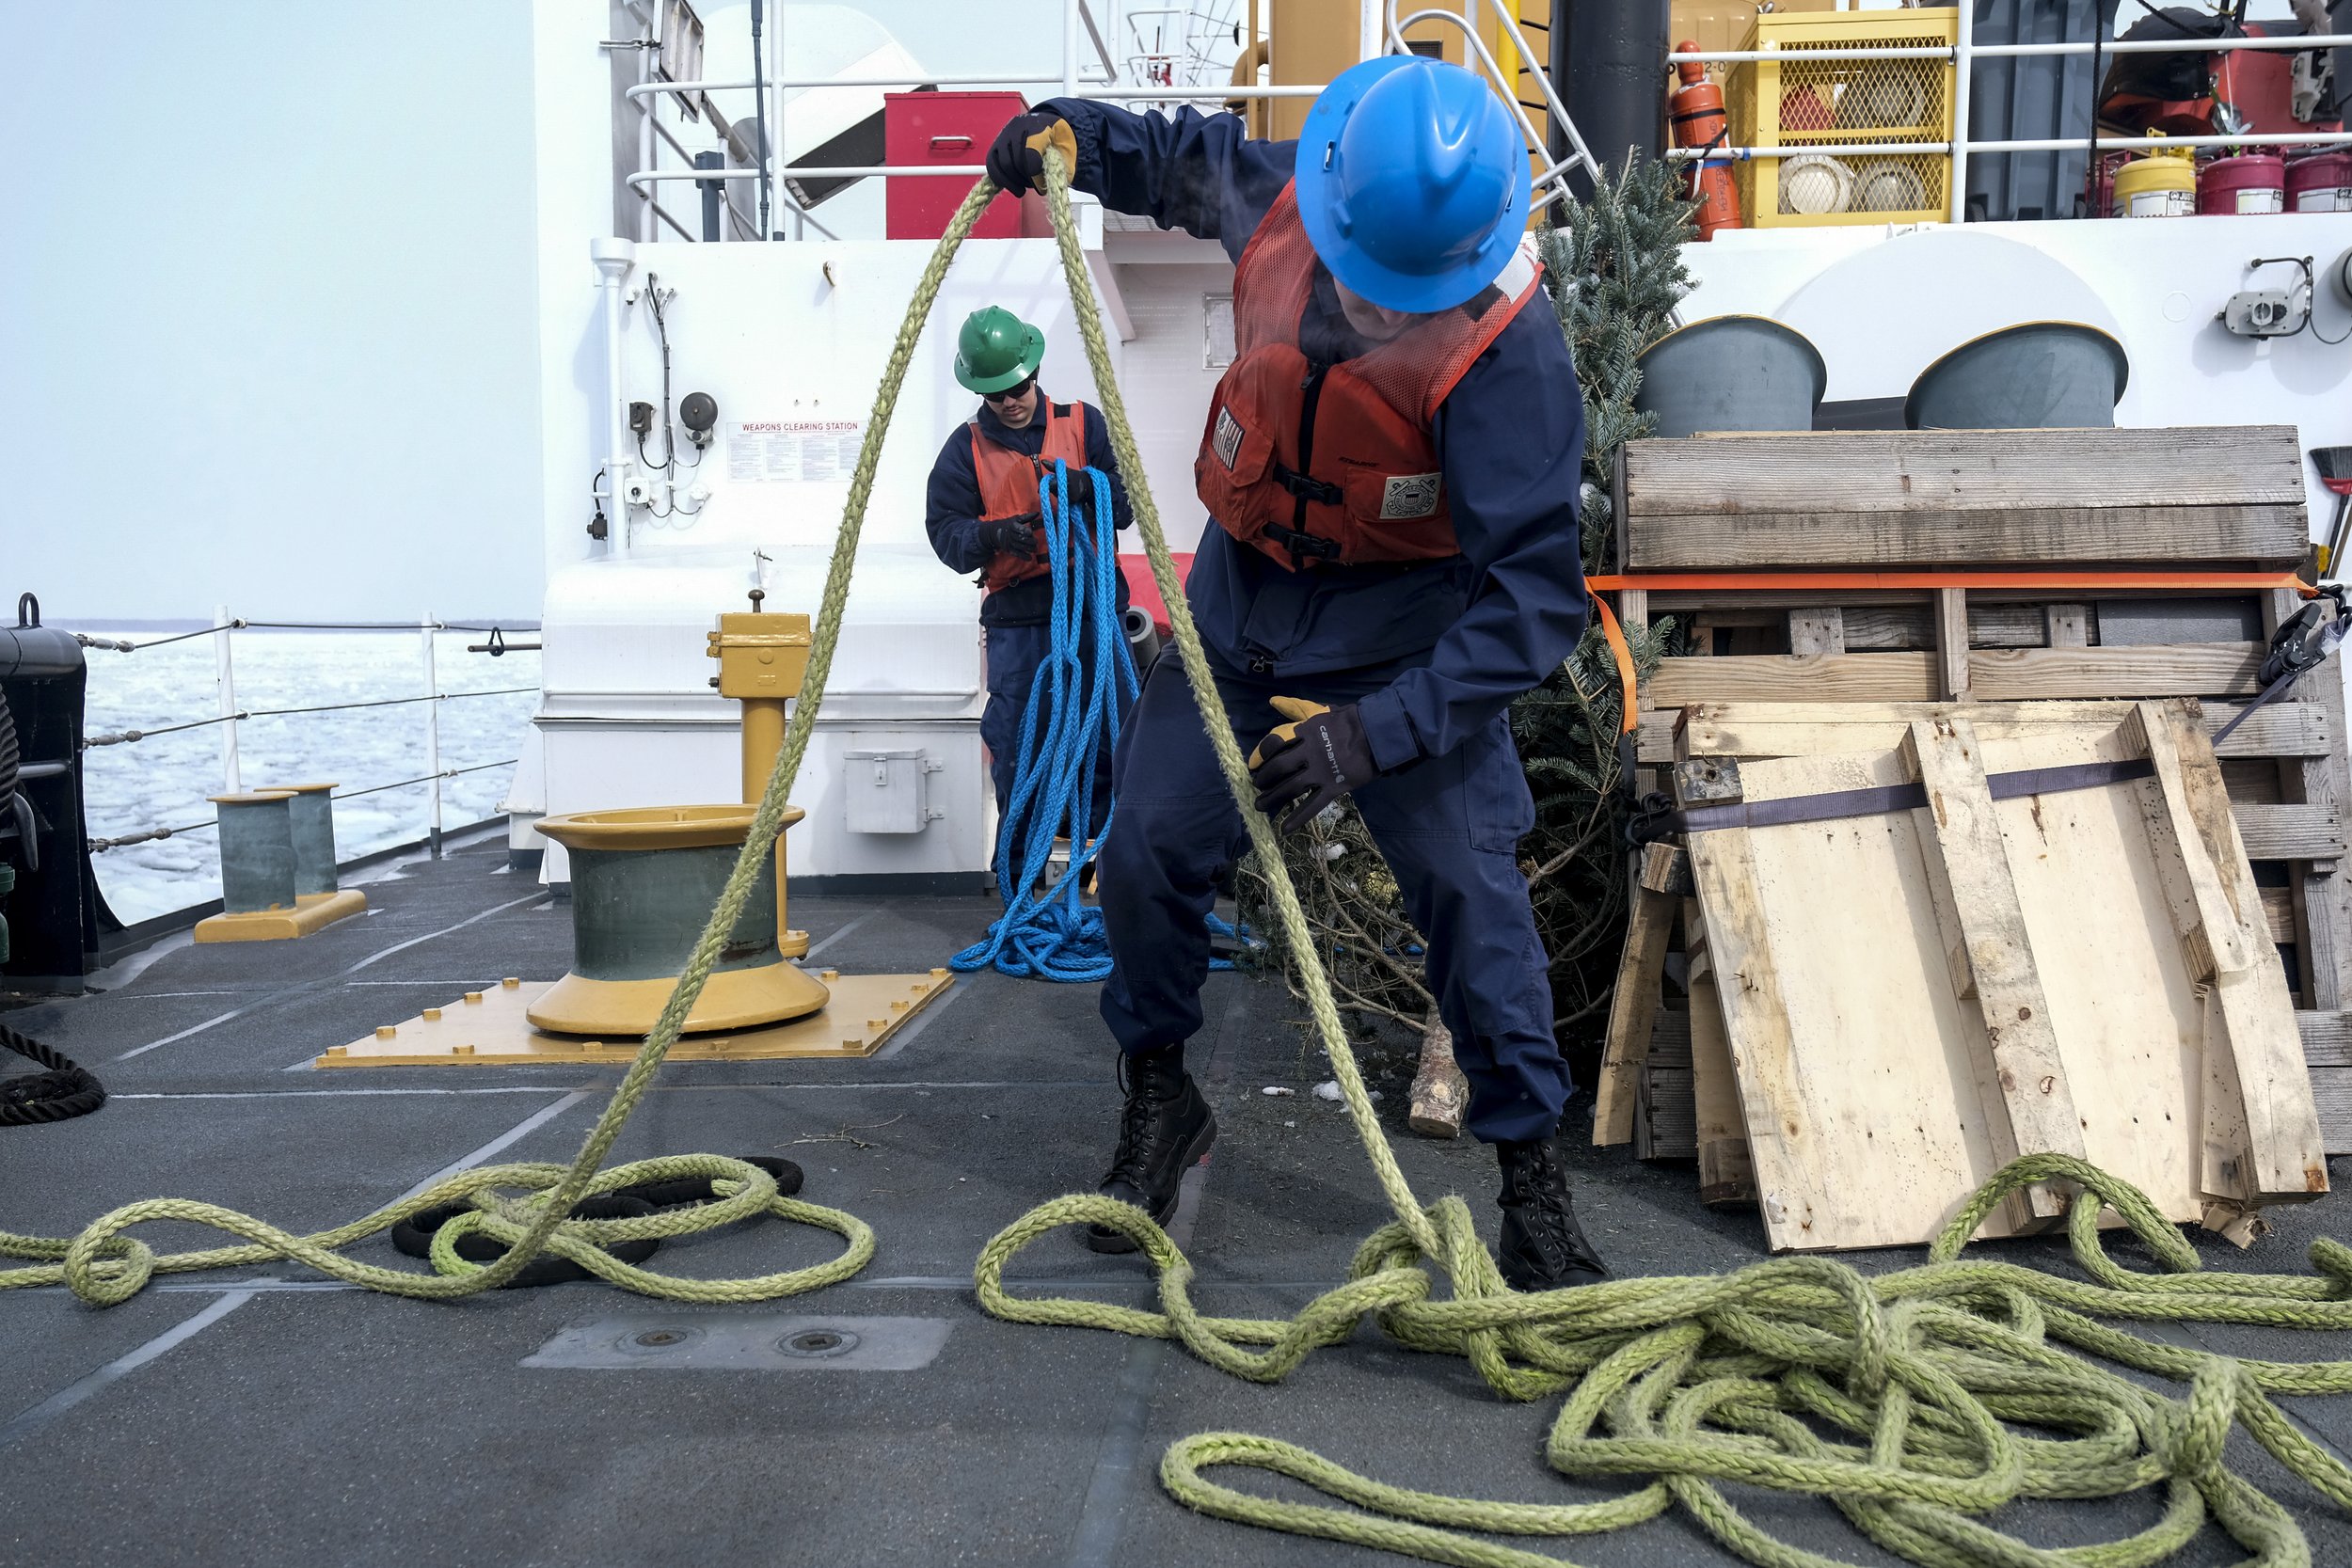  Crew members of the US Coast Guard Cutter Katmai Bay throw out lines and prepare to moor at Lime Island in near Lake Huron following a day of operations cutting ice in the St. Mary's River on Tuesday, March 14, 2023. The Katmai Bay is one of the shi